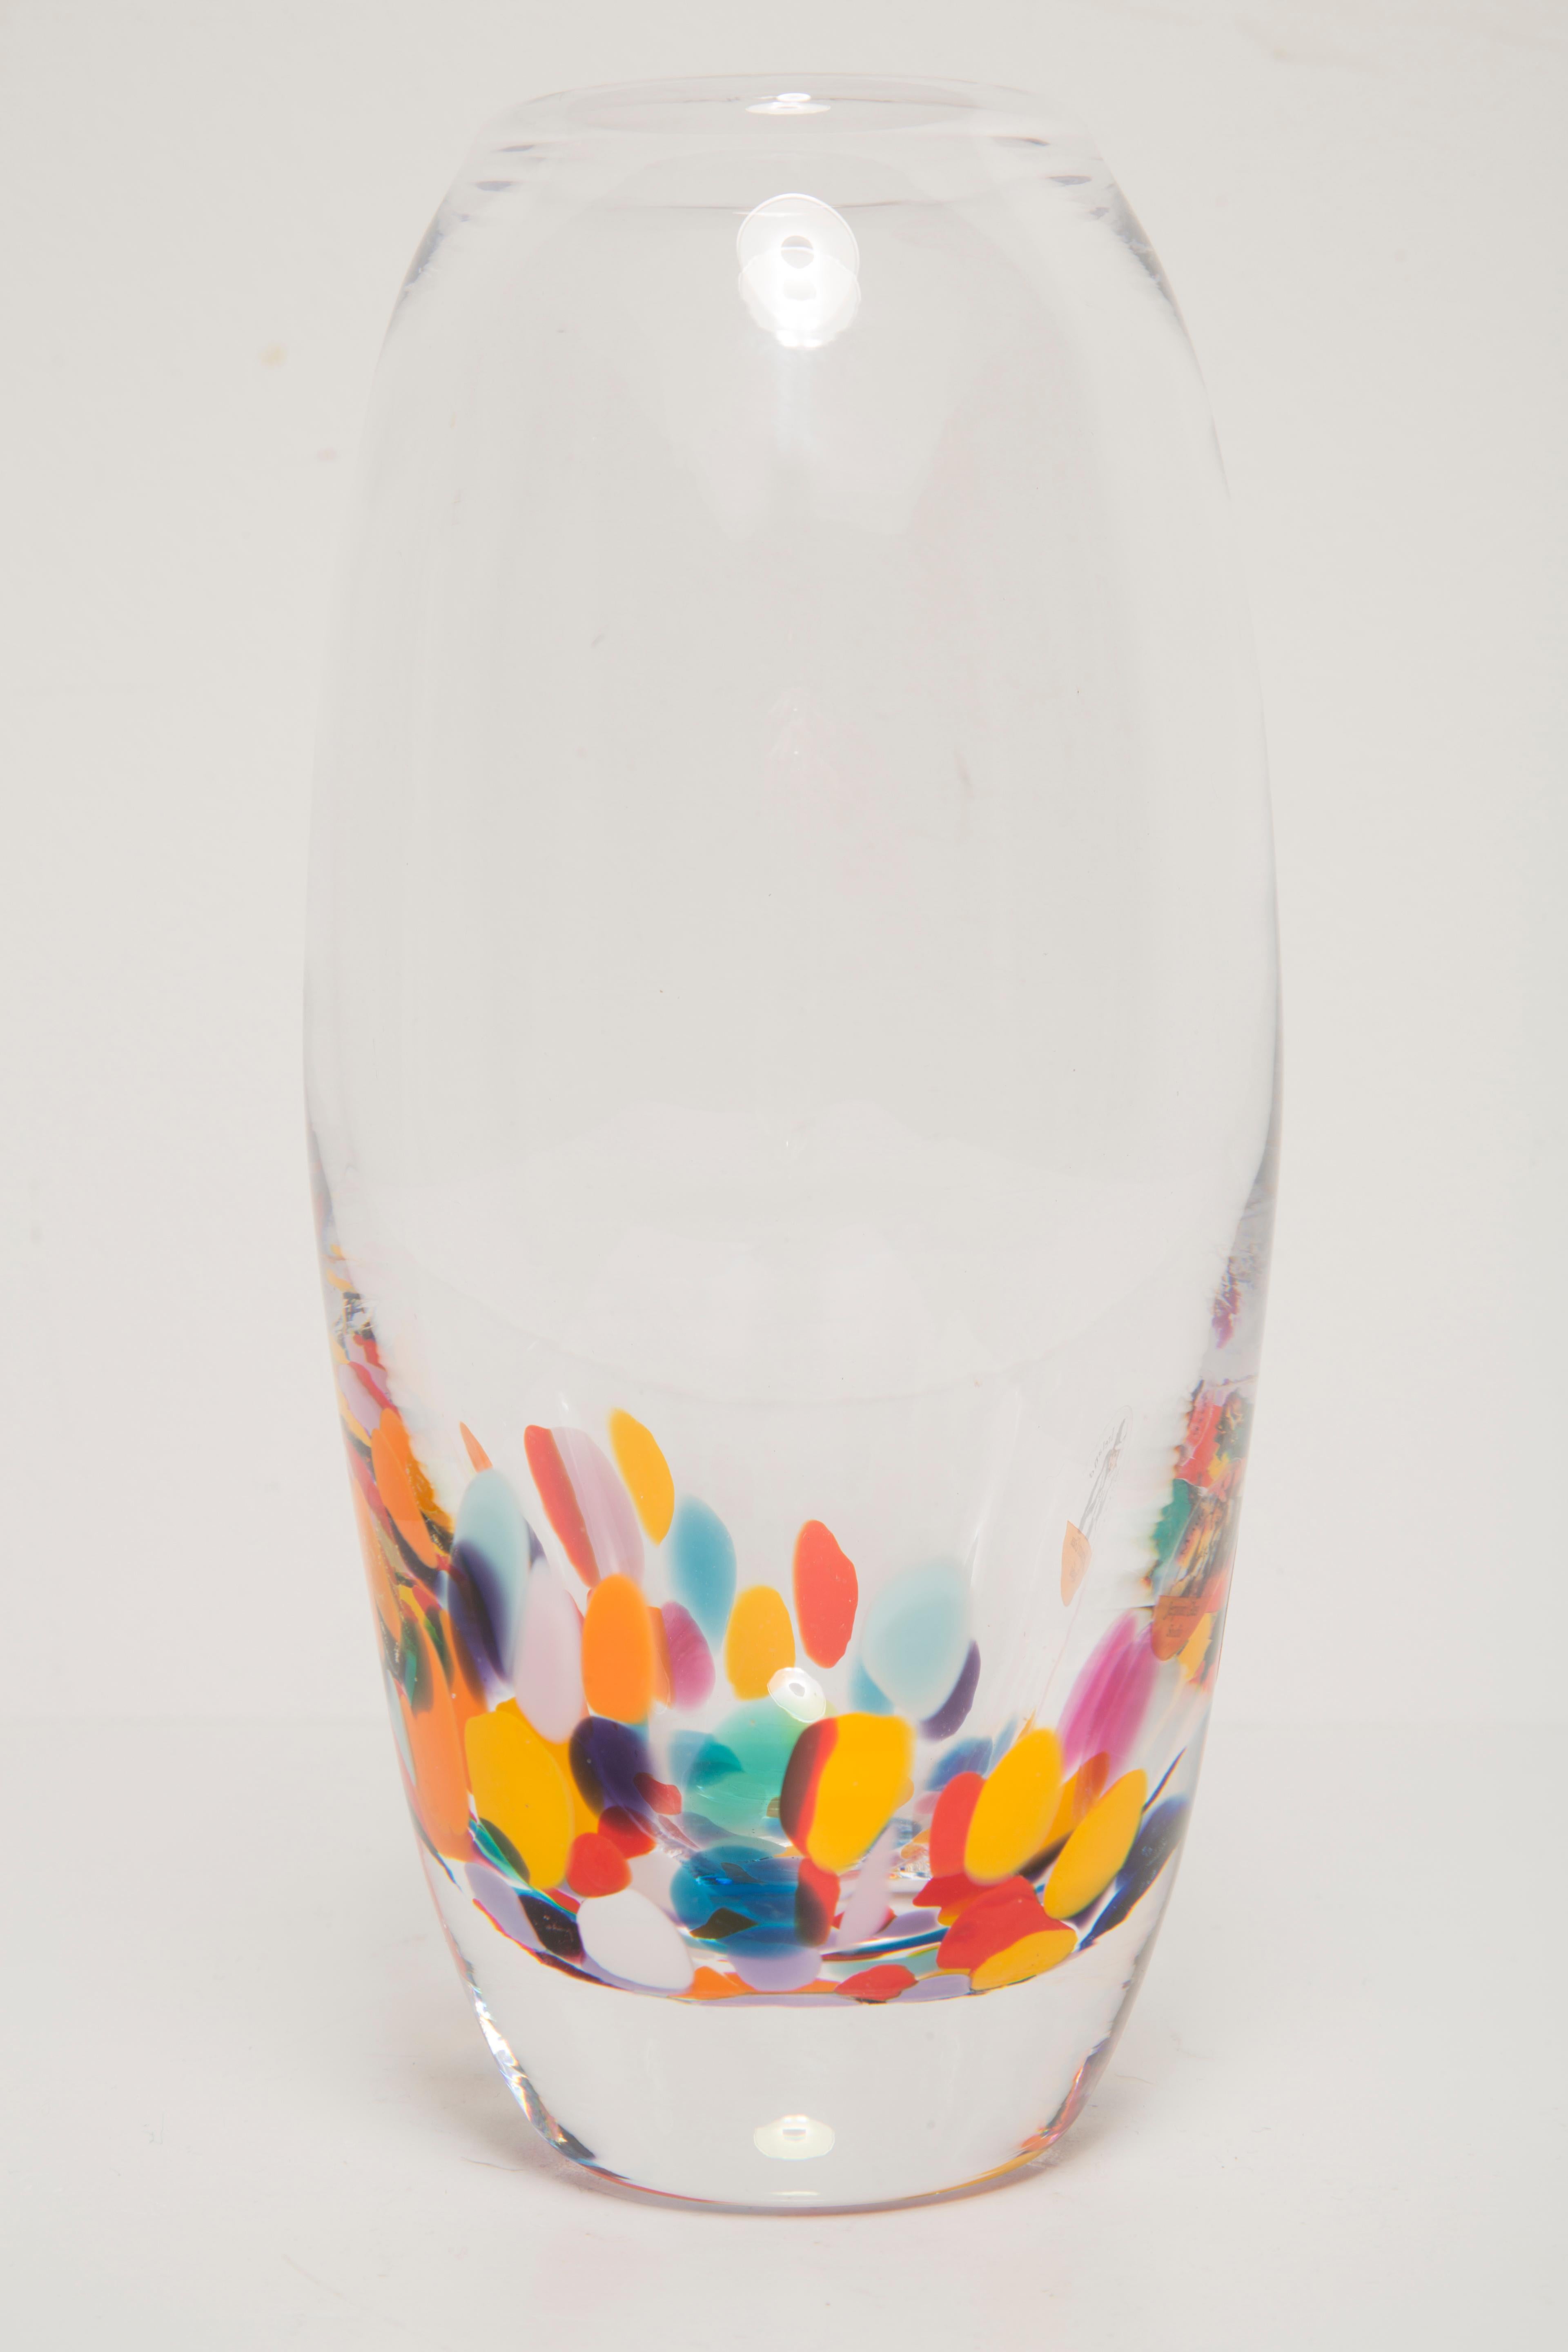 Mid-Century Modern Mid-Century Vintage Dots Transparent Murano Glass Vase, Jerpoint, Irleand, 2000s For Sale